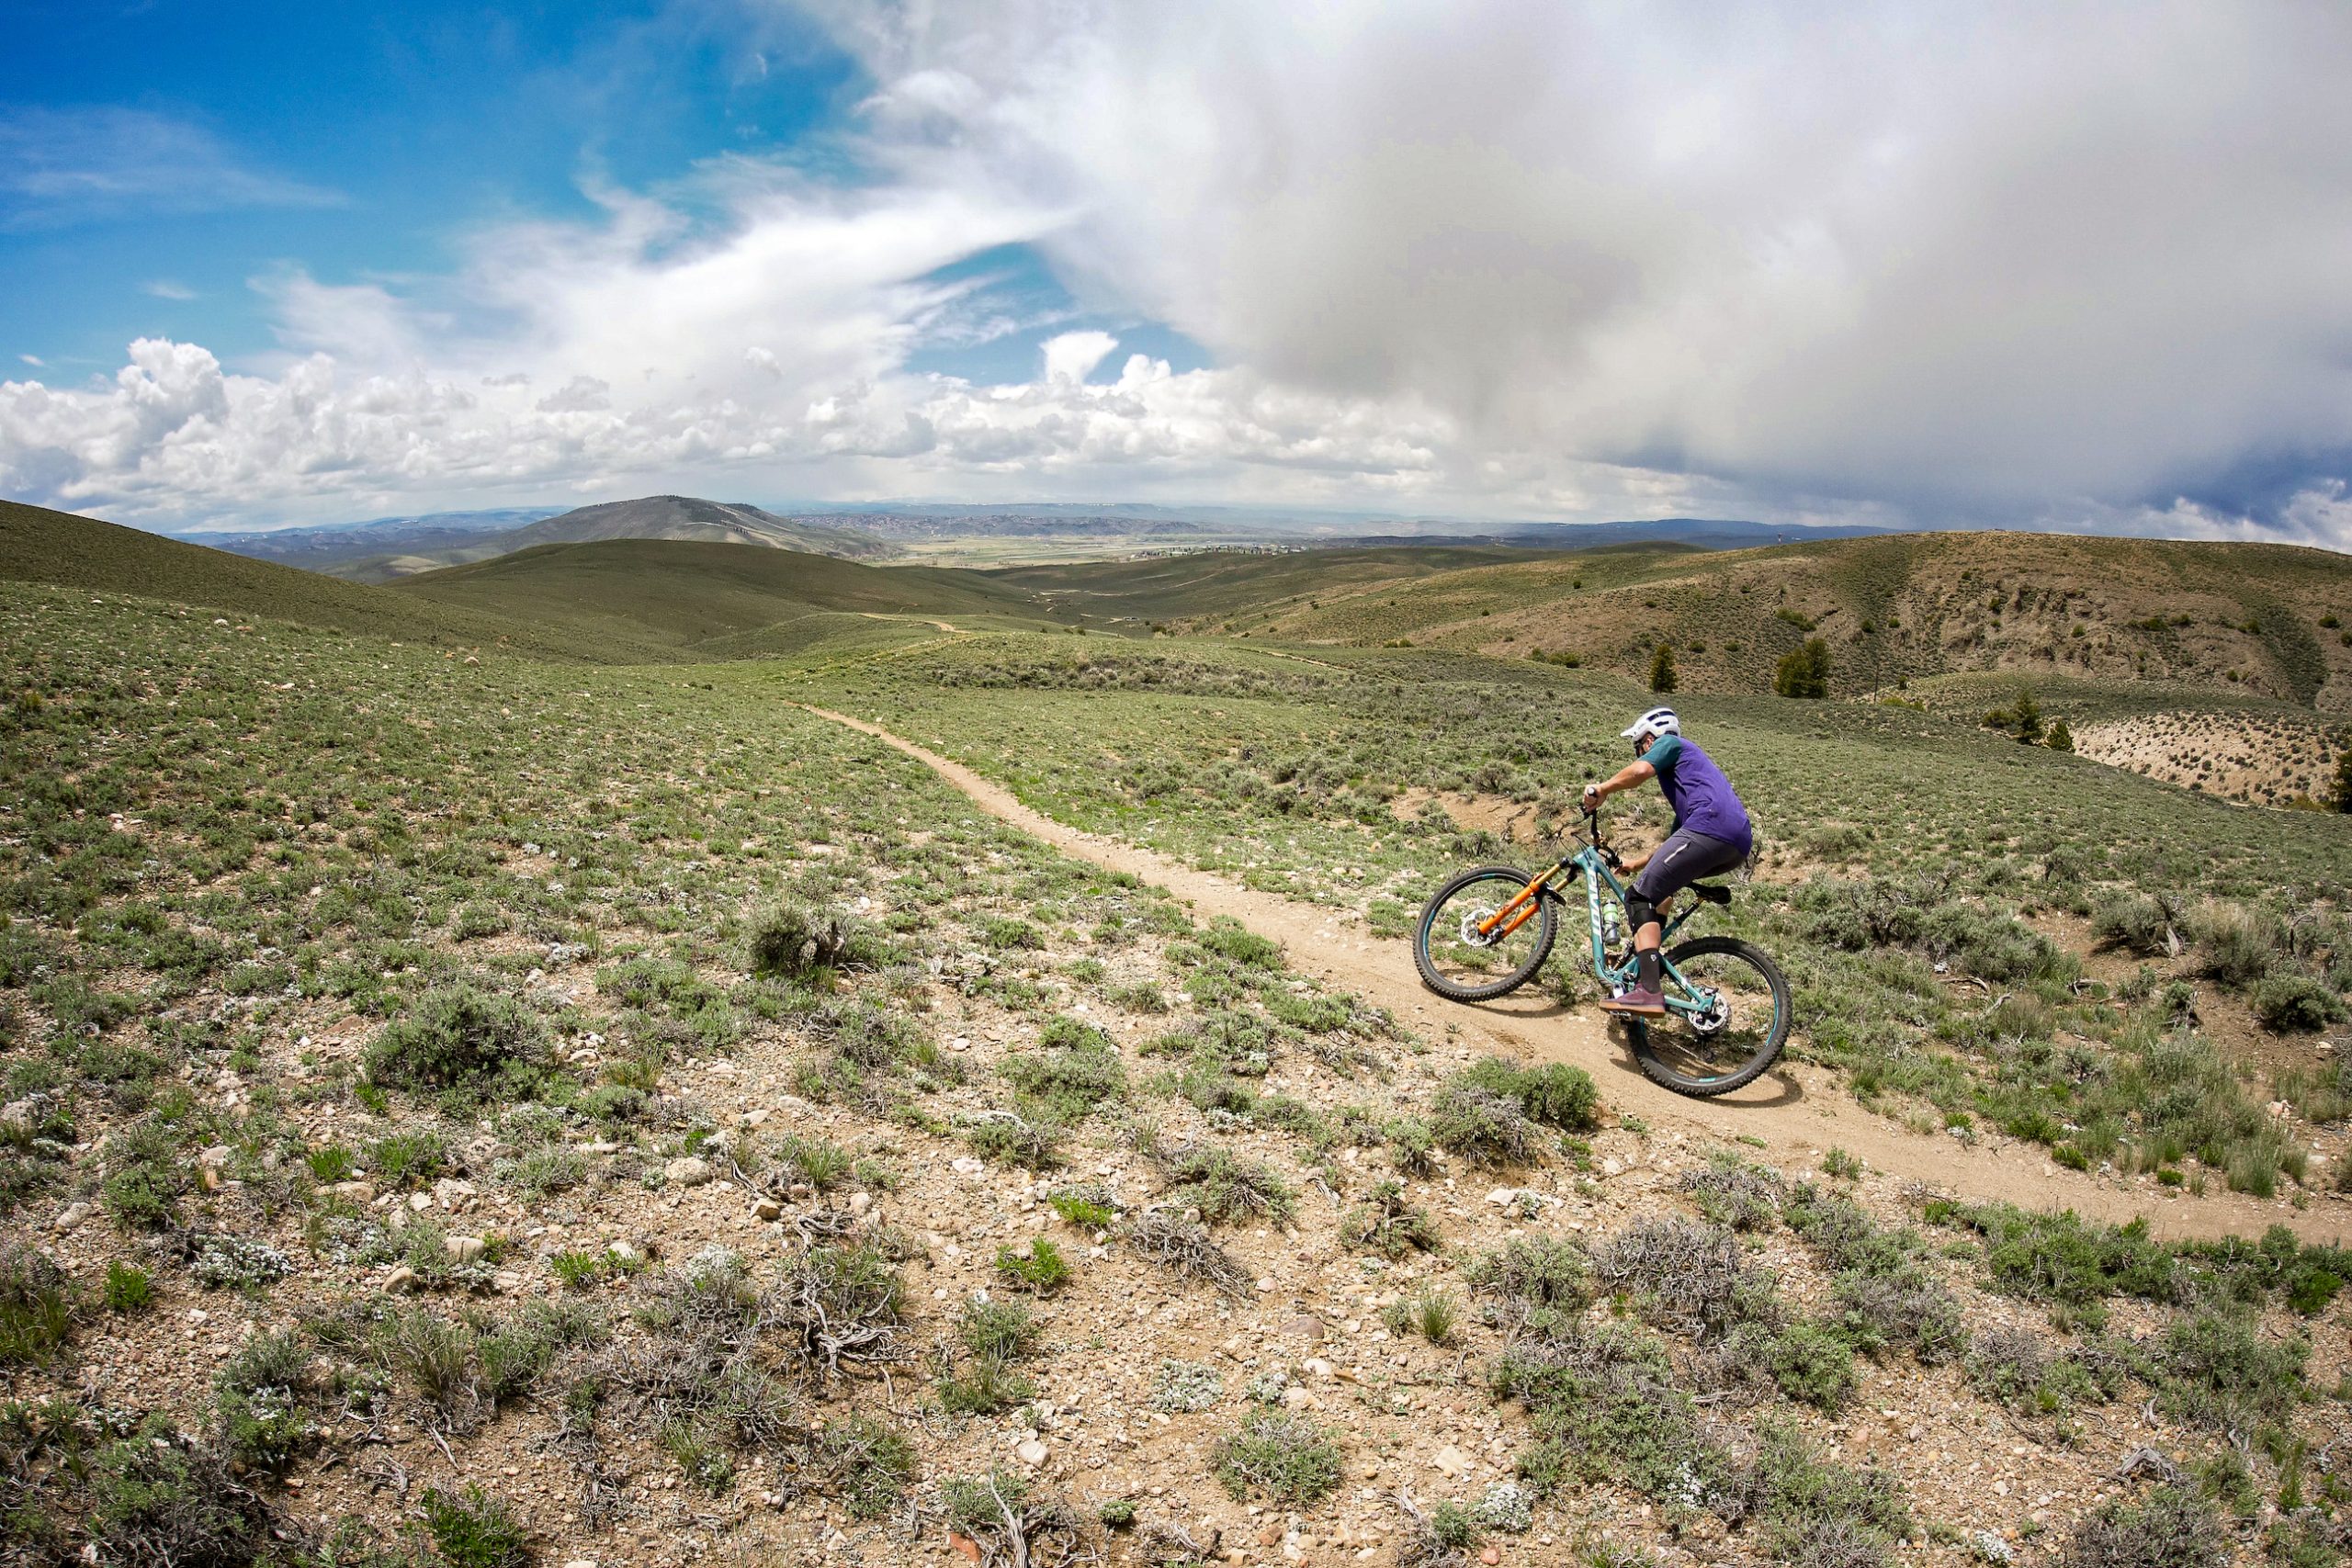 A person riding a bike during a colorado spring weekend getaway